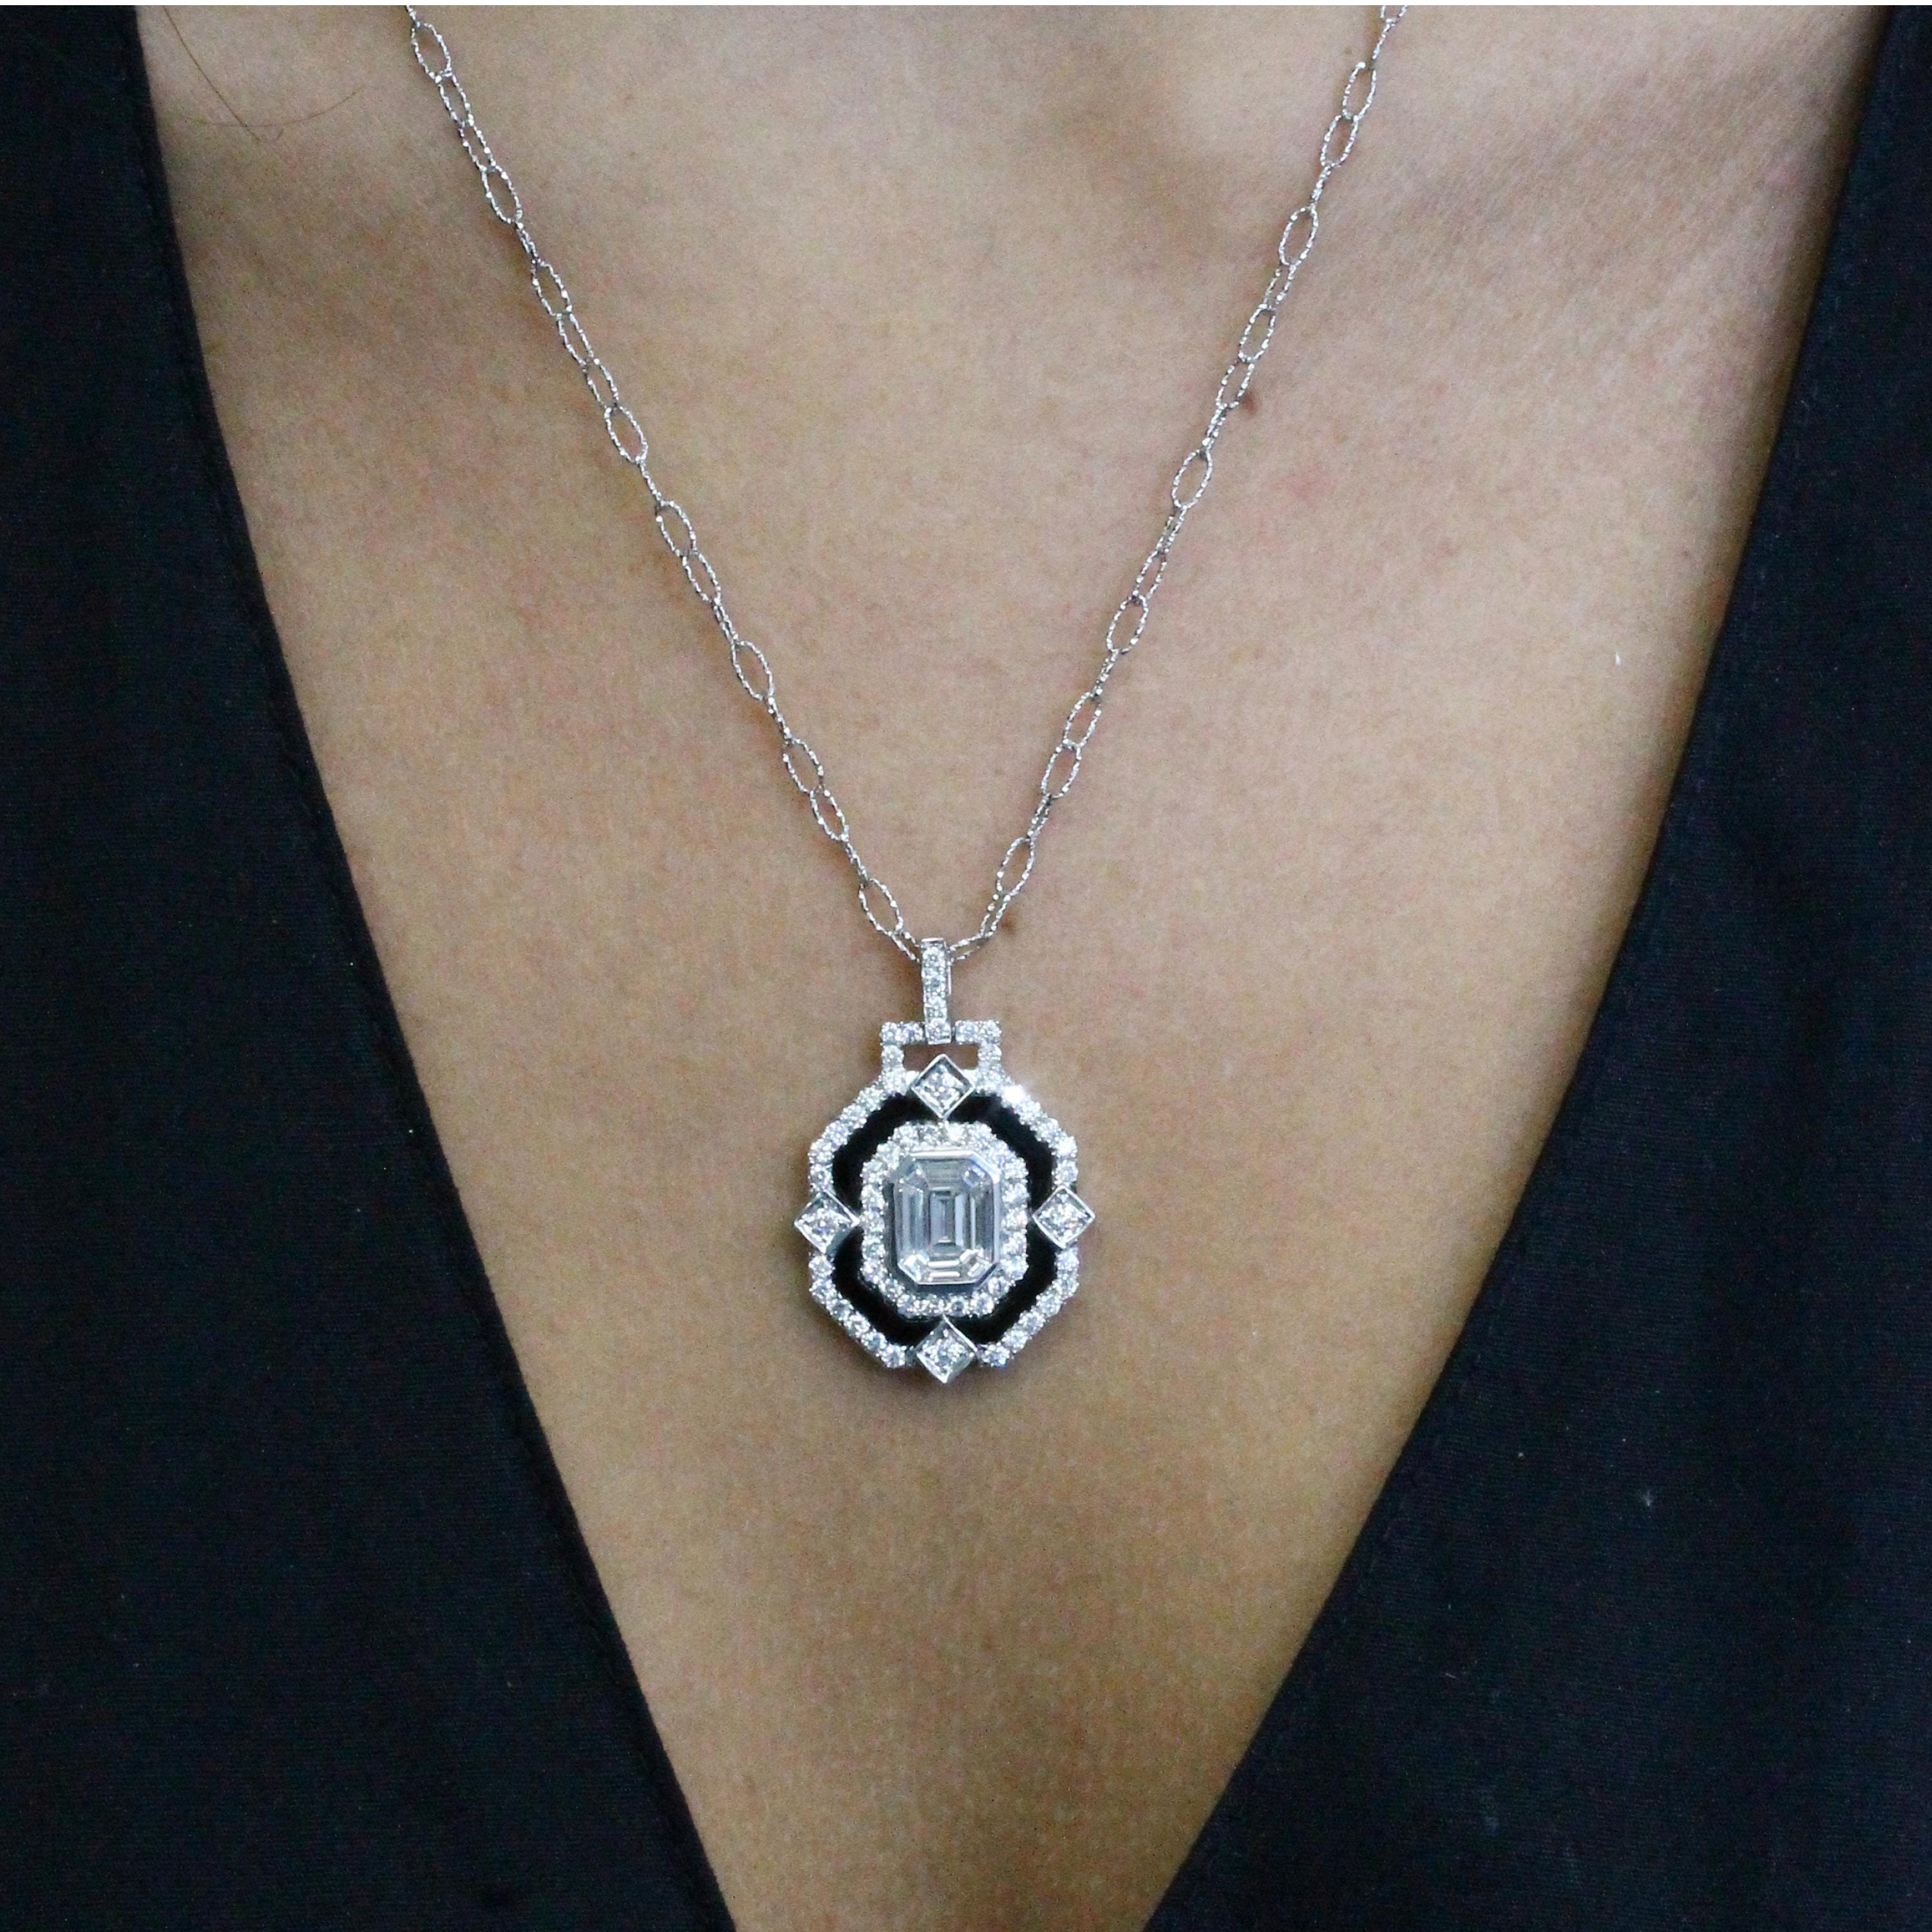 One-of-a-Kind Necklace featuring an Invisible-Set Emerald Diamond Center made up of Baguettes, framed in Black Onyx, in an 18K White Gold Art-Deco setting, hanging on a Handmade Italian 18-inch Textured Link Chain. Round Diamond Accents. Black Onyx